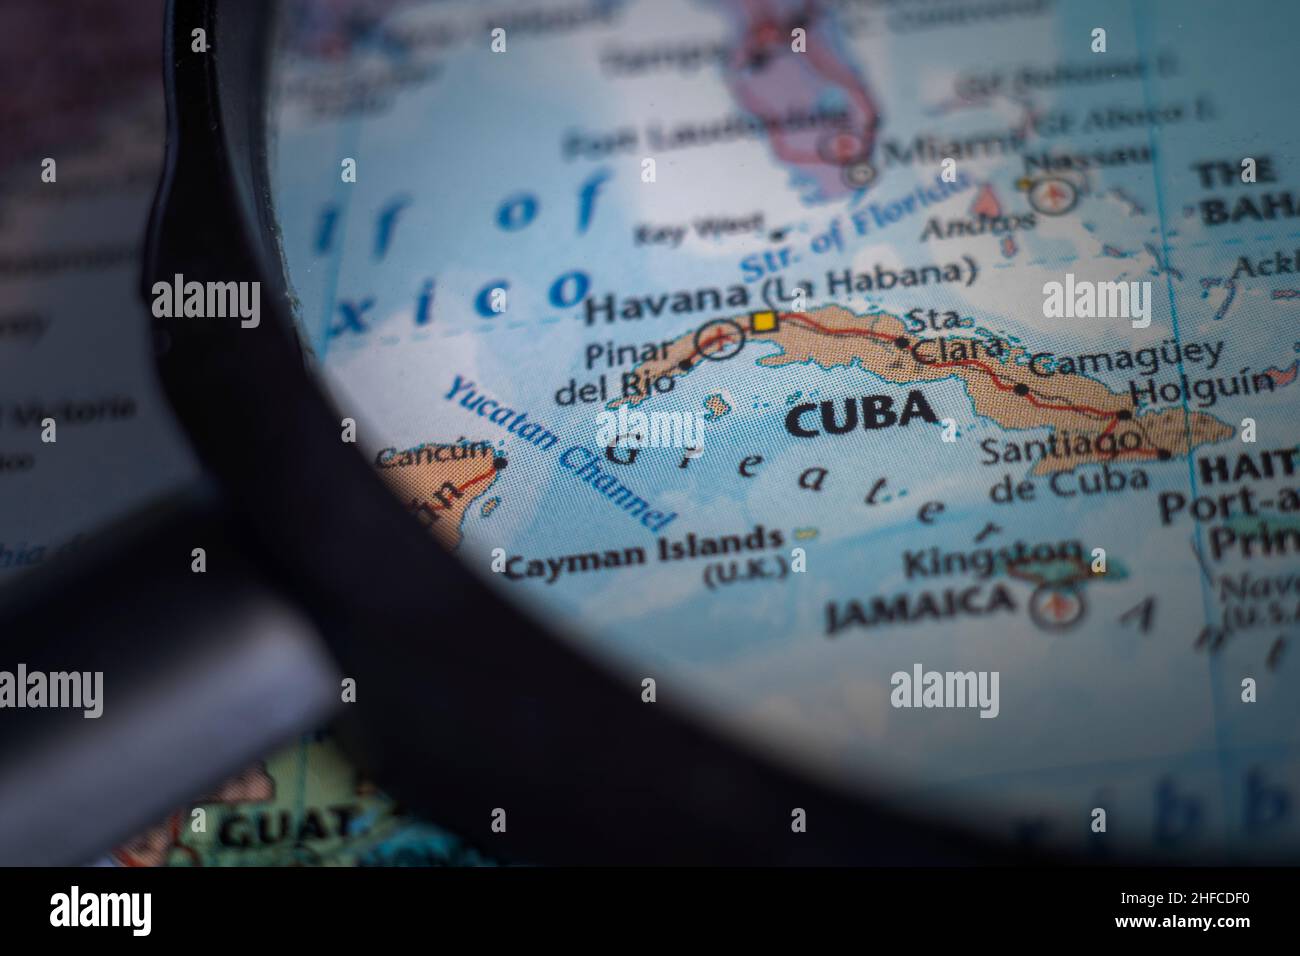 Cuba on a world map through magnifying glass. Cuban travel destination planning pinned Stock Photo